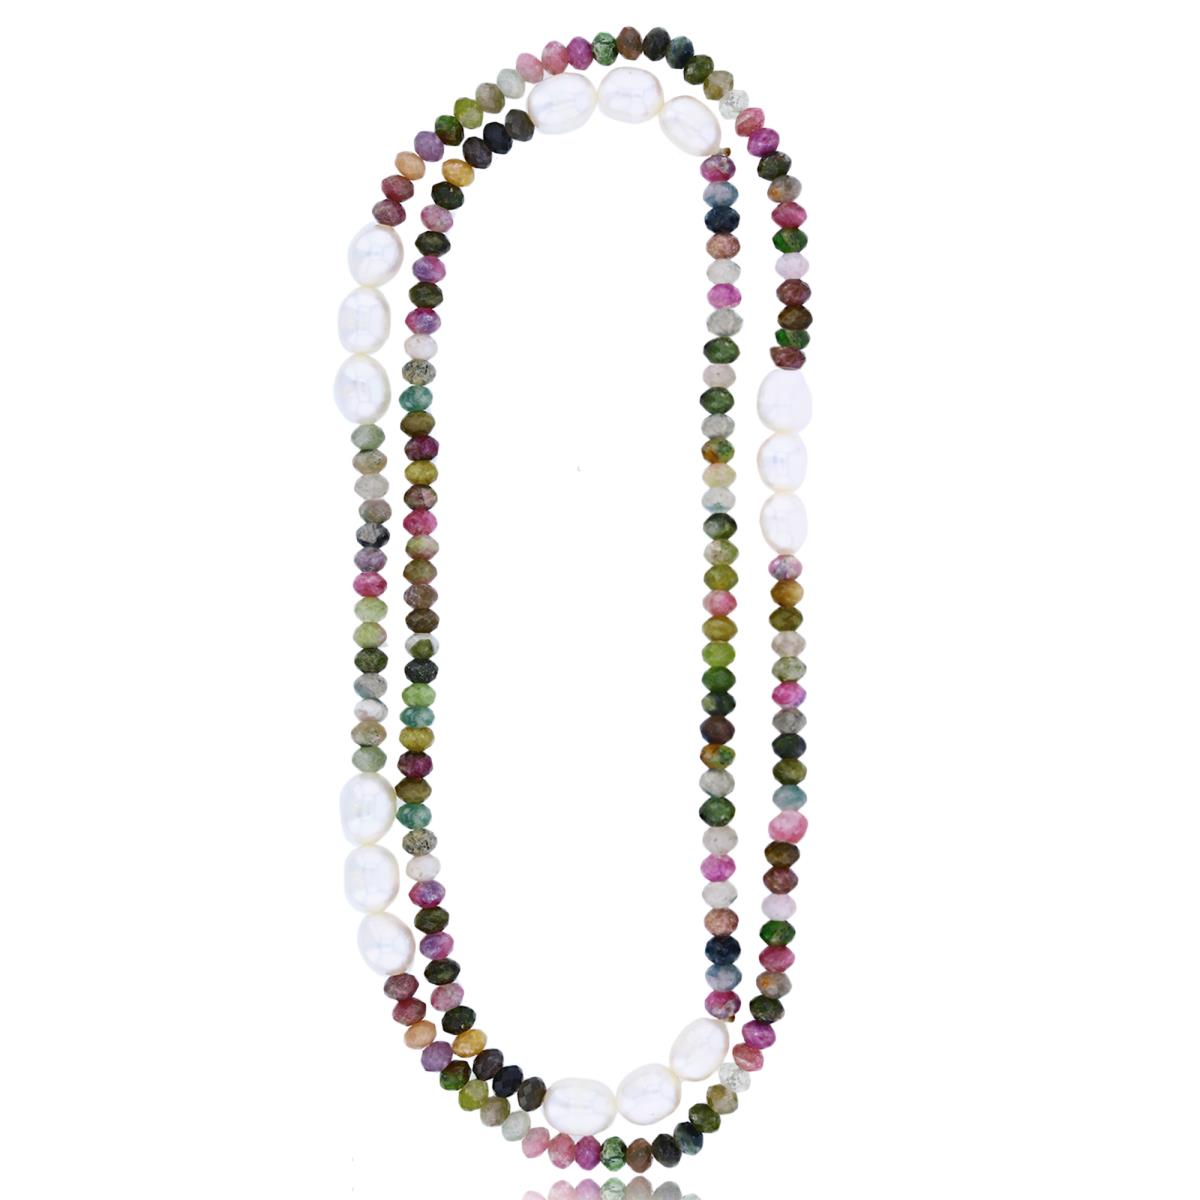 7-8mm Oval FWP & 4x5mm Tourmaline 42" Necklace